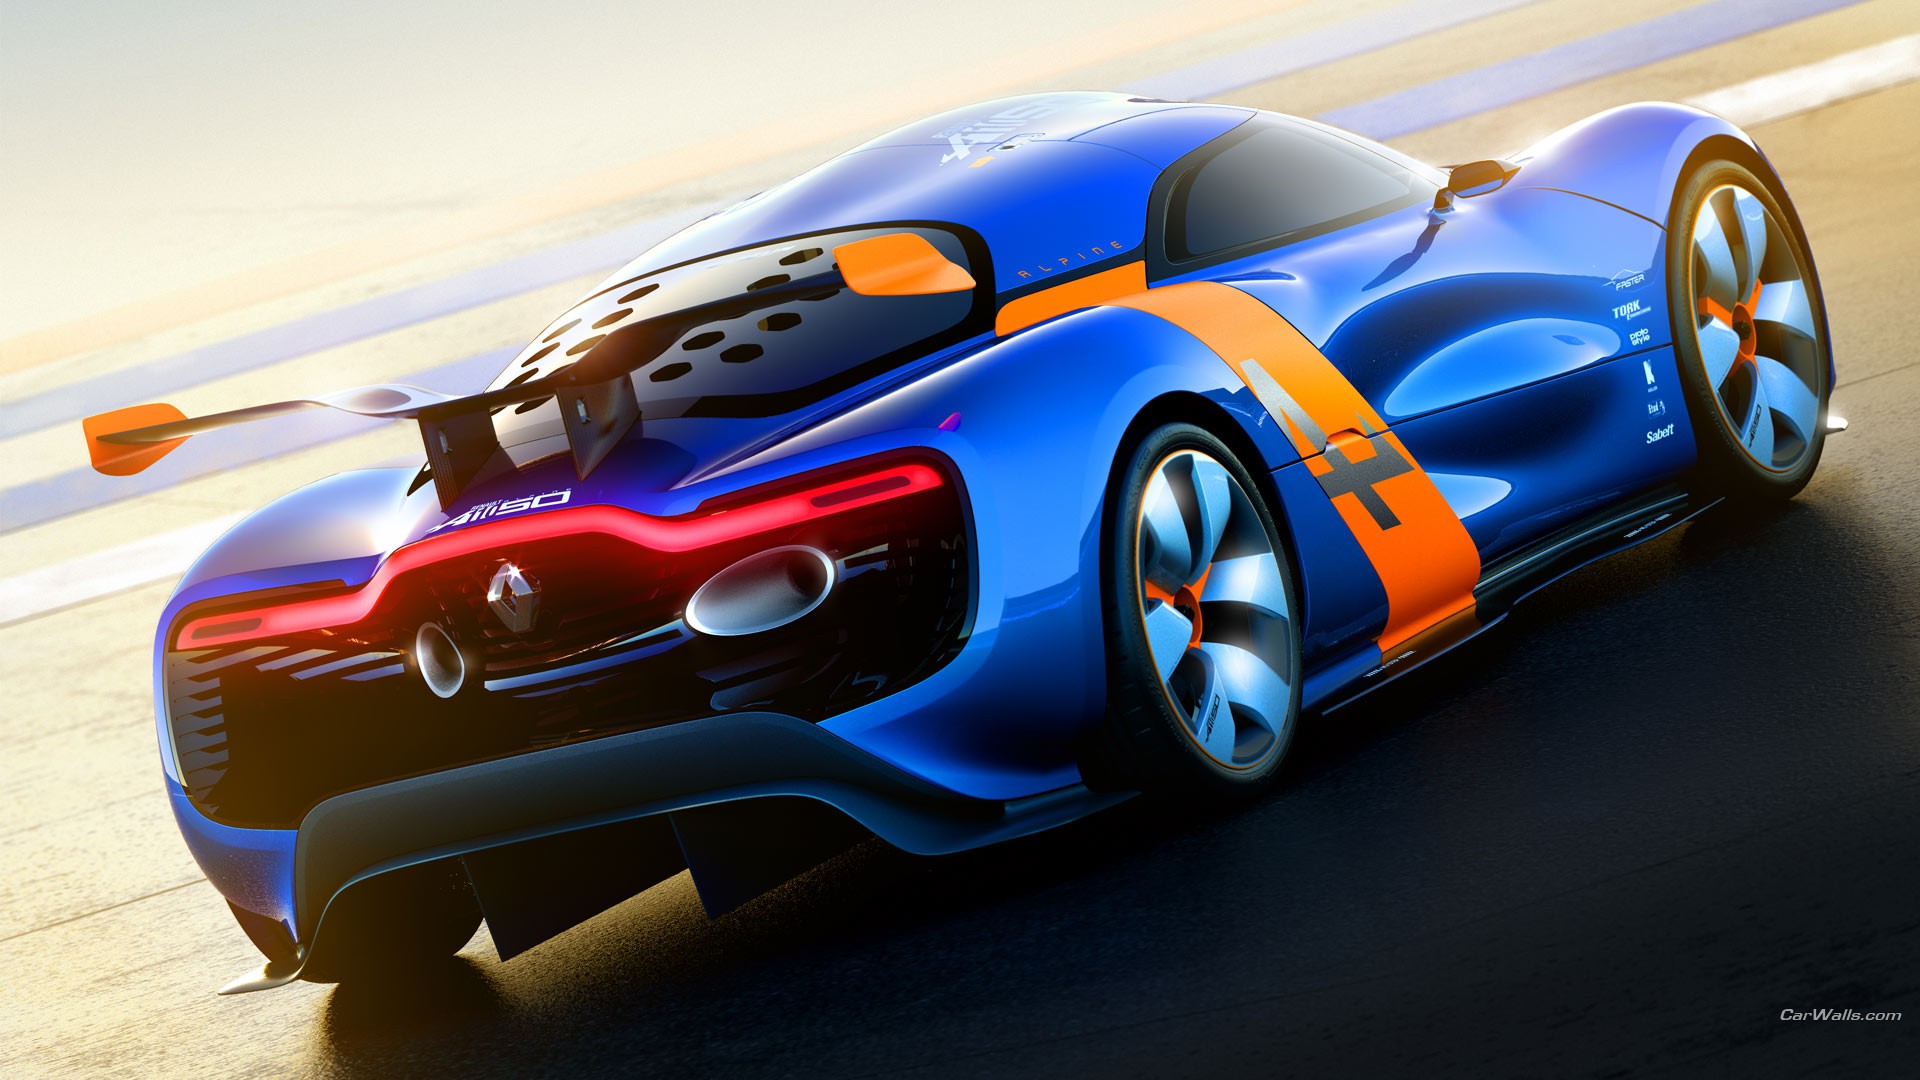 General 1920x1080 car Renault Alpine Renault vehicle blue cars French Cars concept cars Alpine A110-50 watermarked